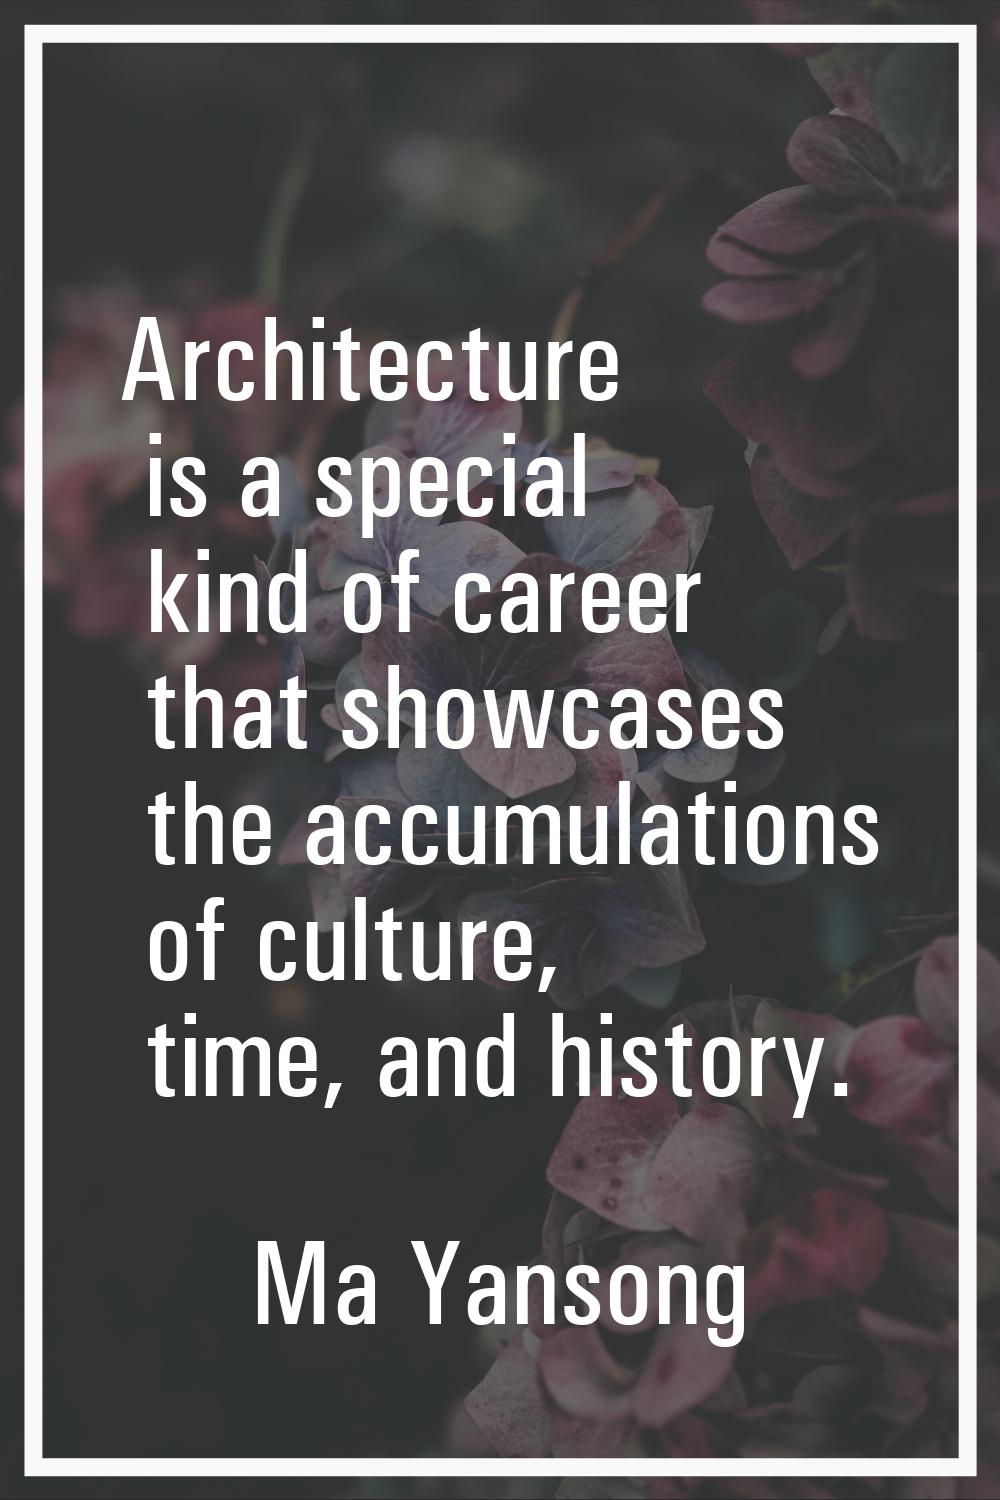 Architecture is a special kind of career that showcases the accumulations of culture, time, and his